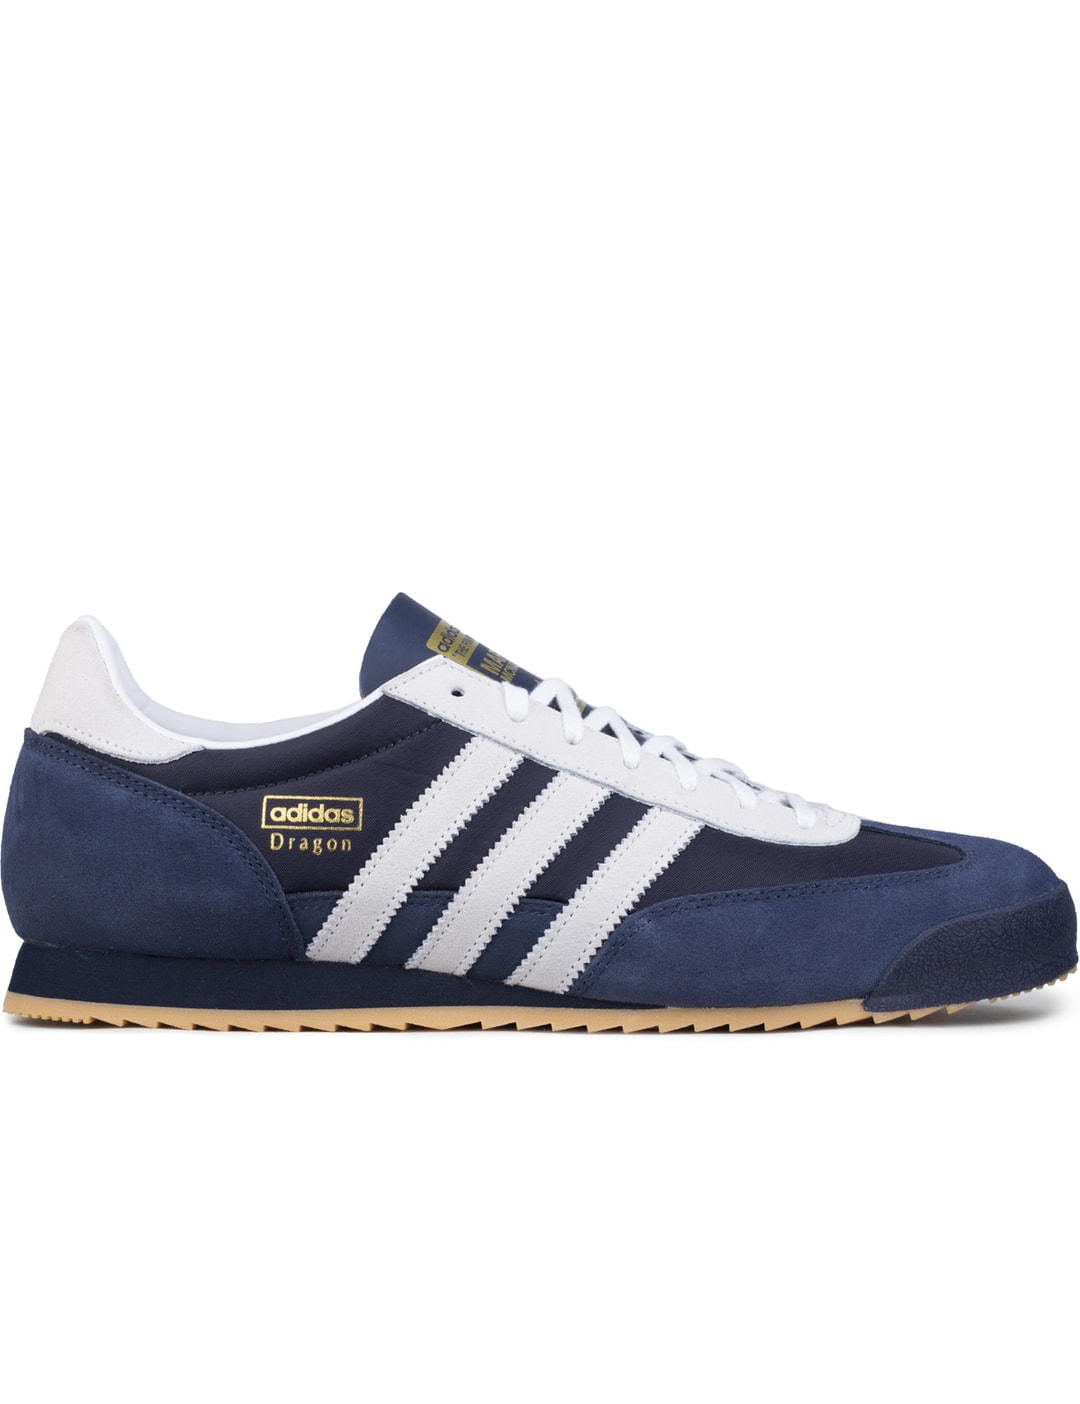 Originals - Adidas Originals X The Fourness Night Navy/ftwr White/gum Dragon | - Globally Fashion and Lifestyle by Hypebeast